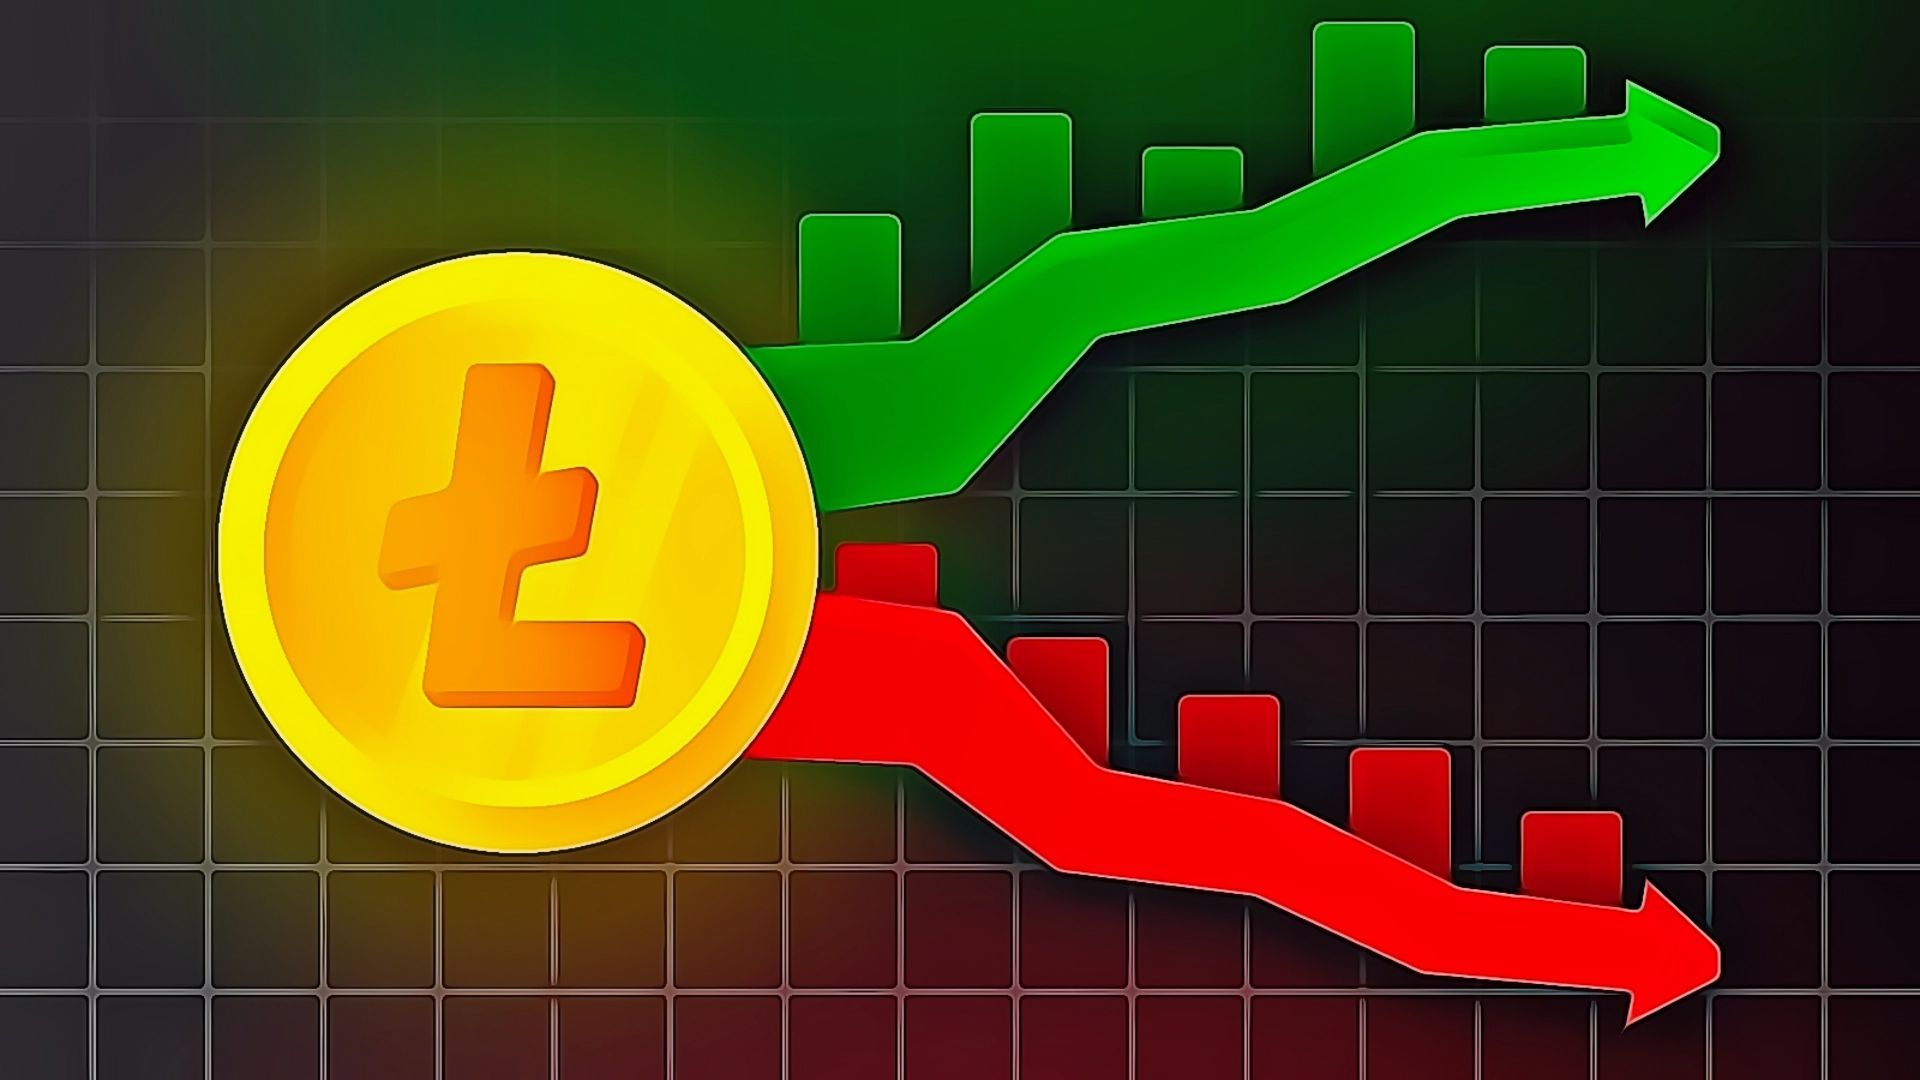 Litecoin Heed Prognosis & Prediction (May even unprejudiced fifteenth) – LTC Loses 30% Following a Bearish Pattern, Can it Crack This Lengthy Channel? thumbnail